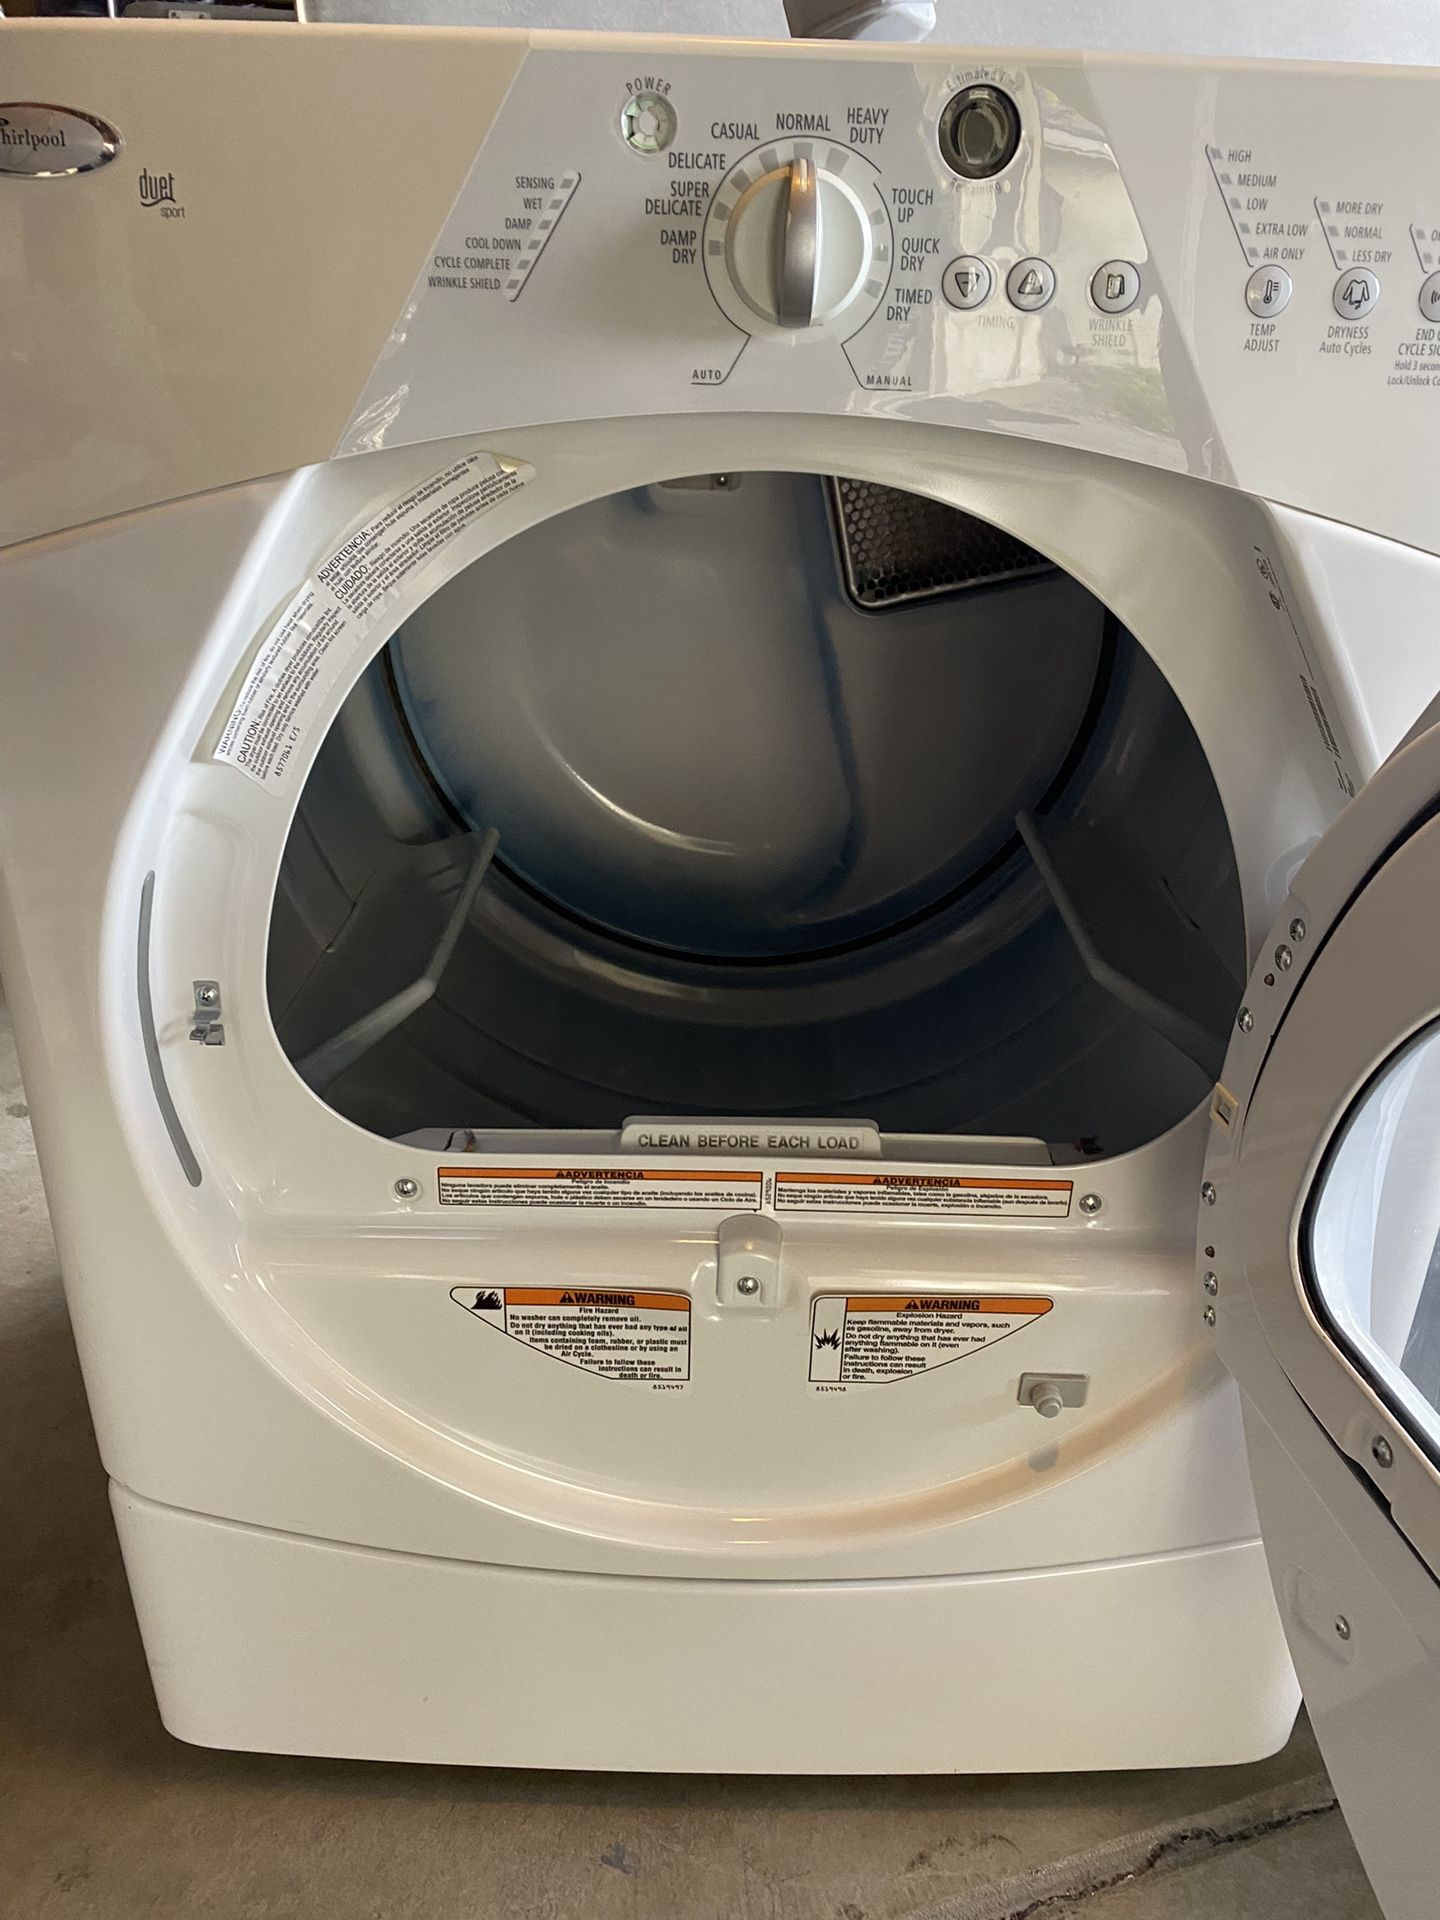 Dryer Whirlpool Make an Offer Electric 